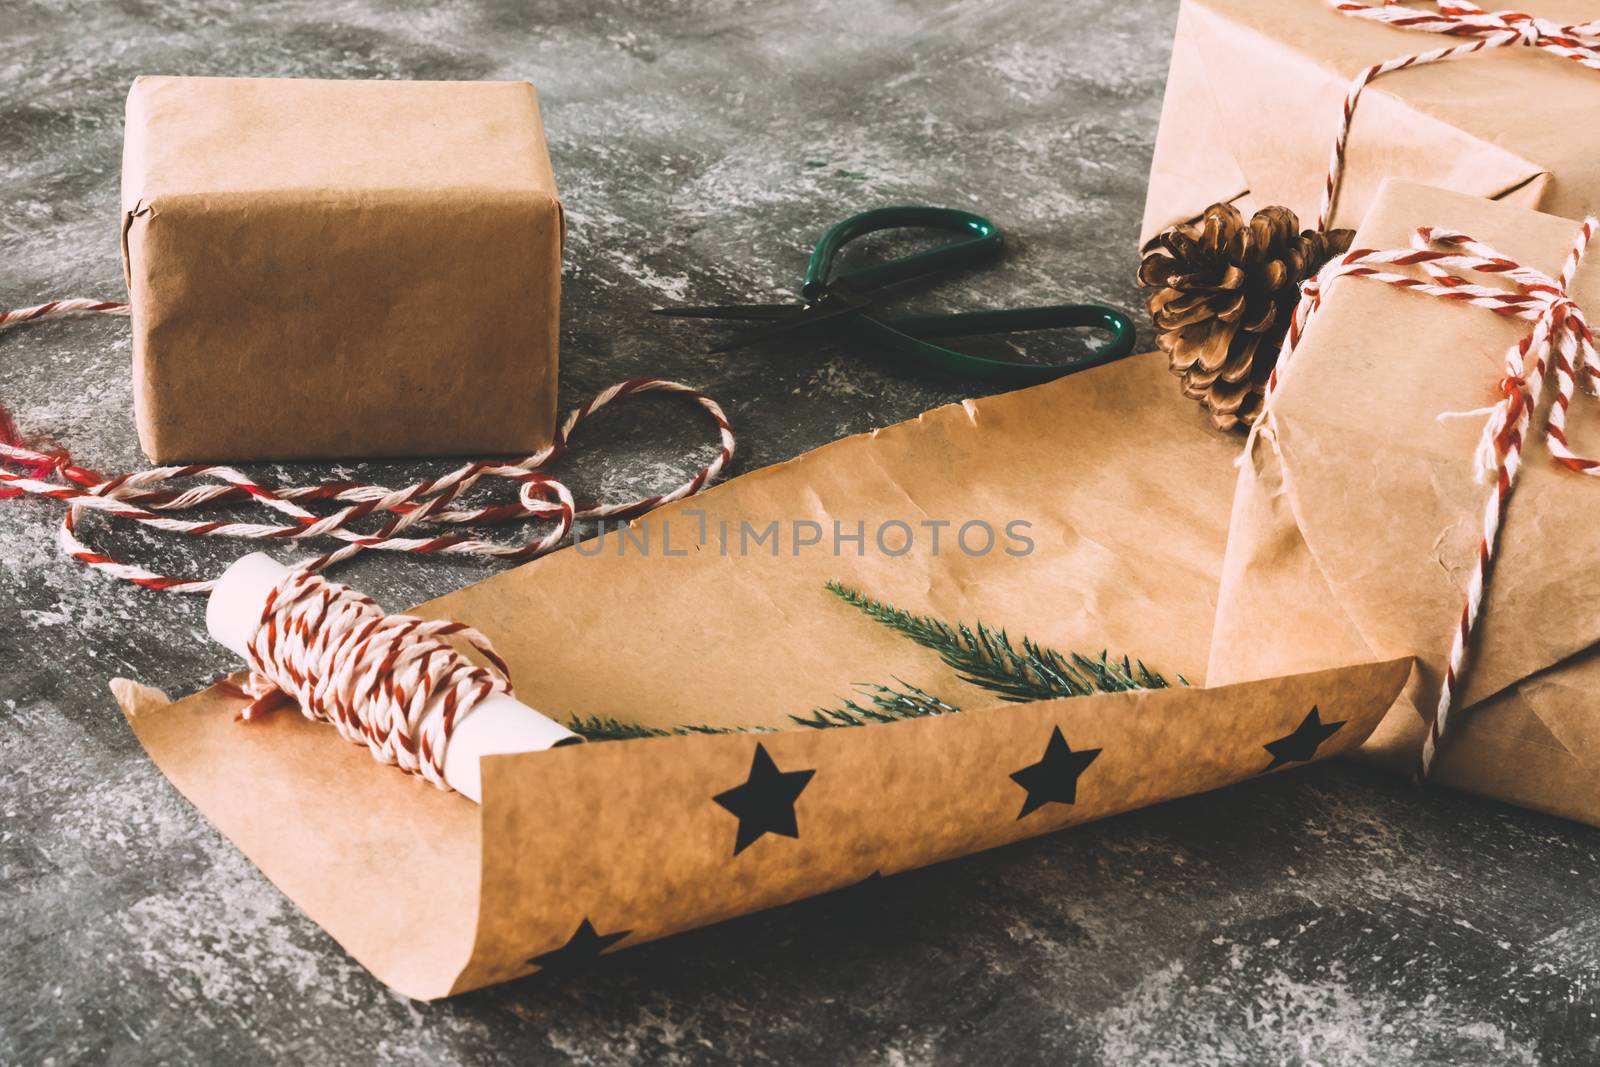 Preparation christmas gifts on gray grunge background. by ronnarong